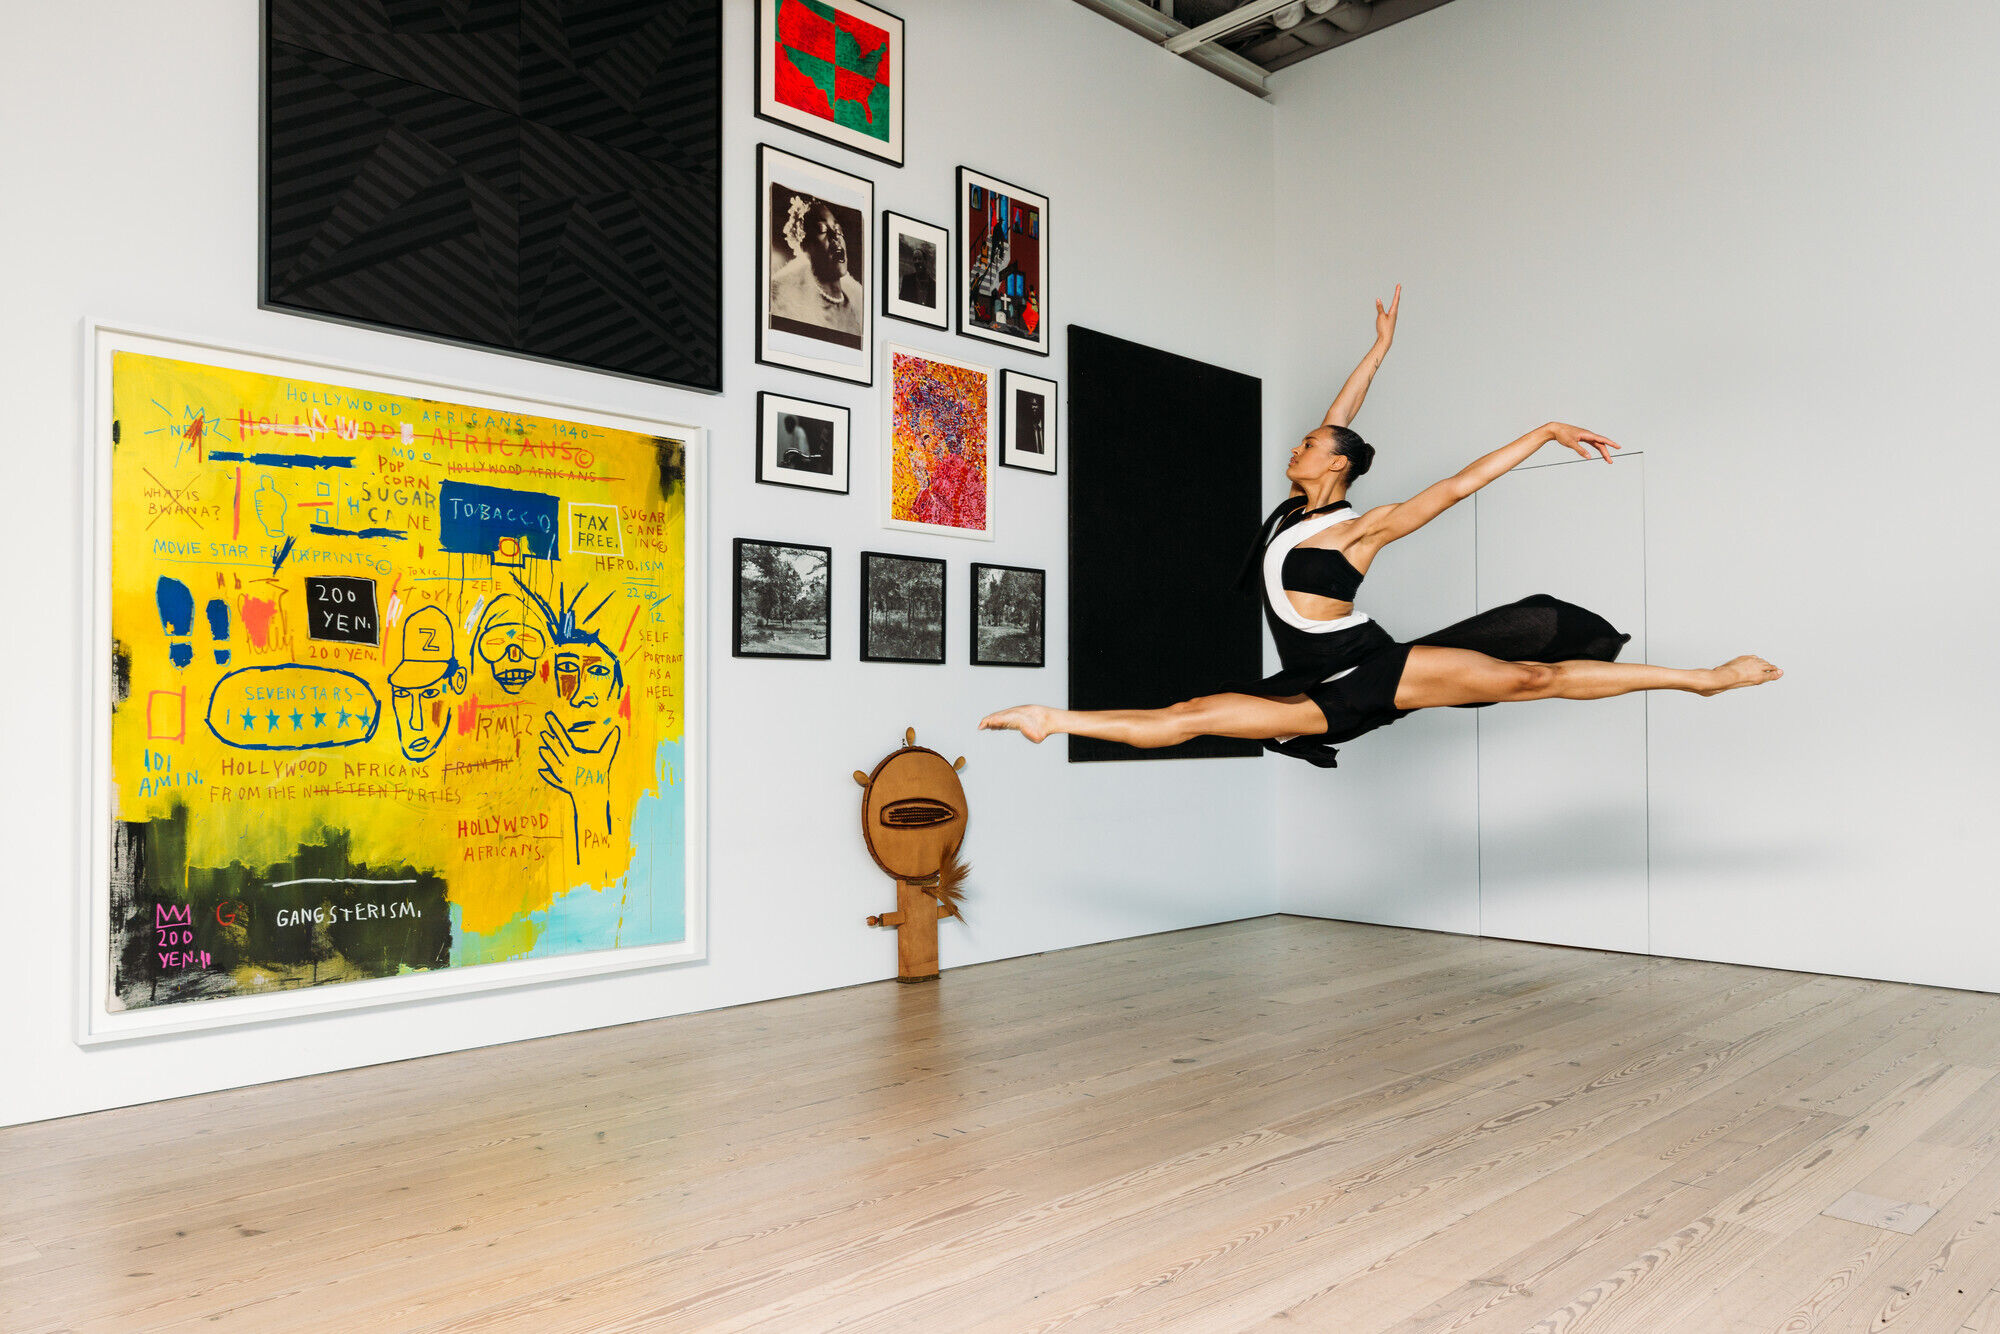 A dancer in a black and white outfit performs a grand jeté in an art gallery with colorful paintings and photographs on the walls.